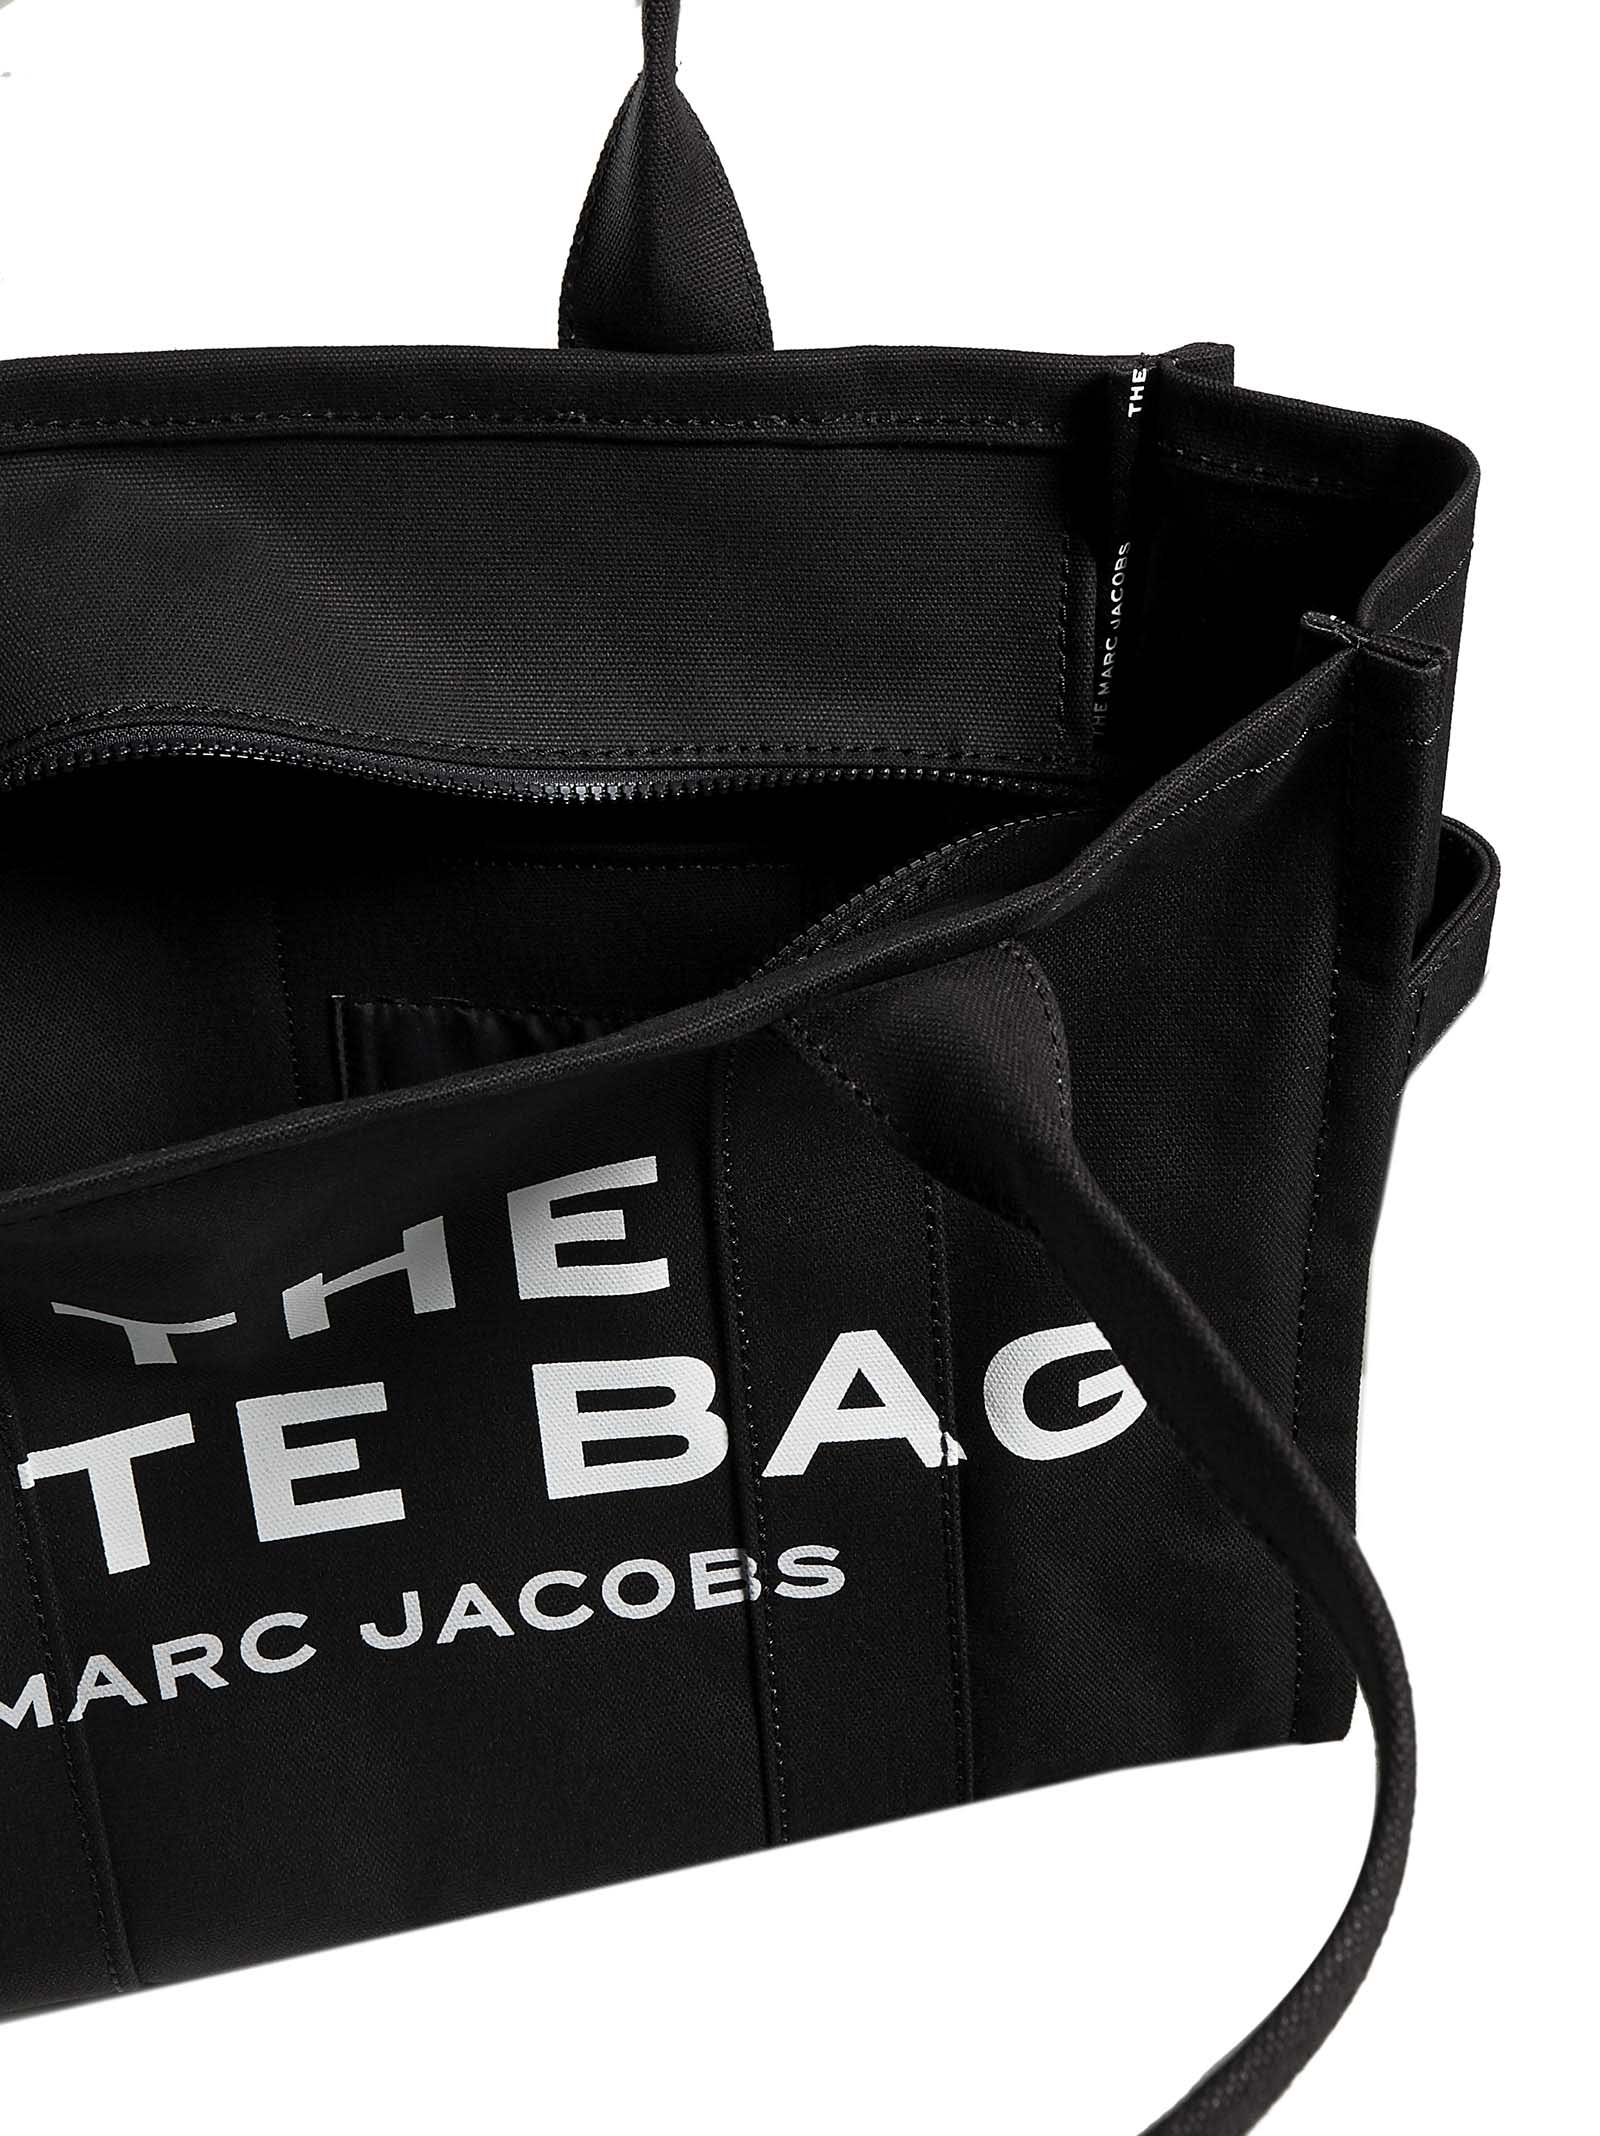 Shop Marc Jacobs Tote In Black